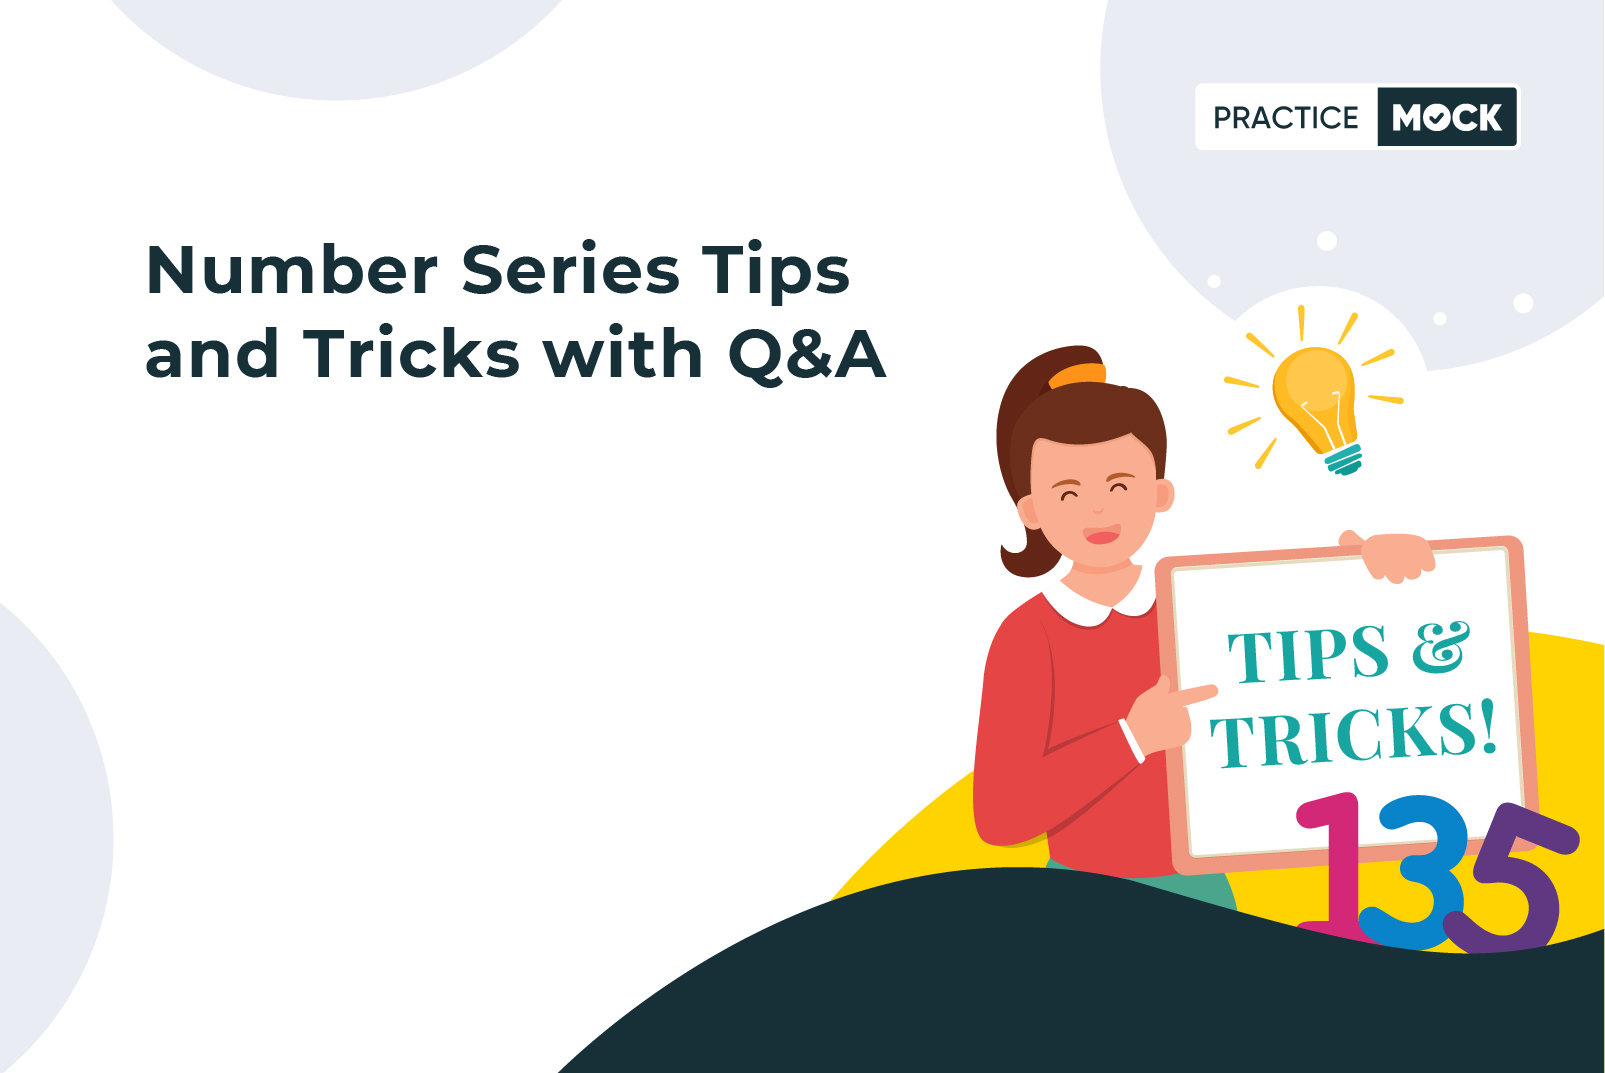 Number Series Tips and Tricks with Q&A